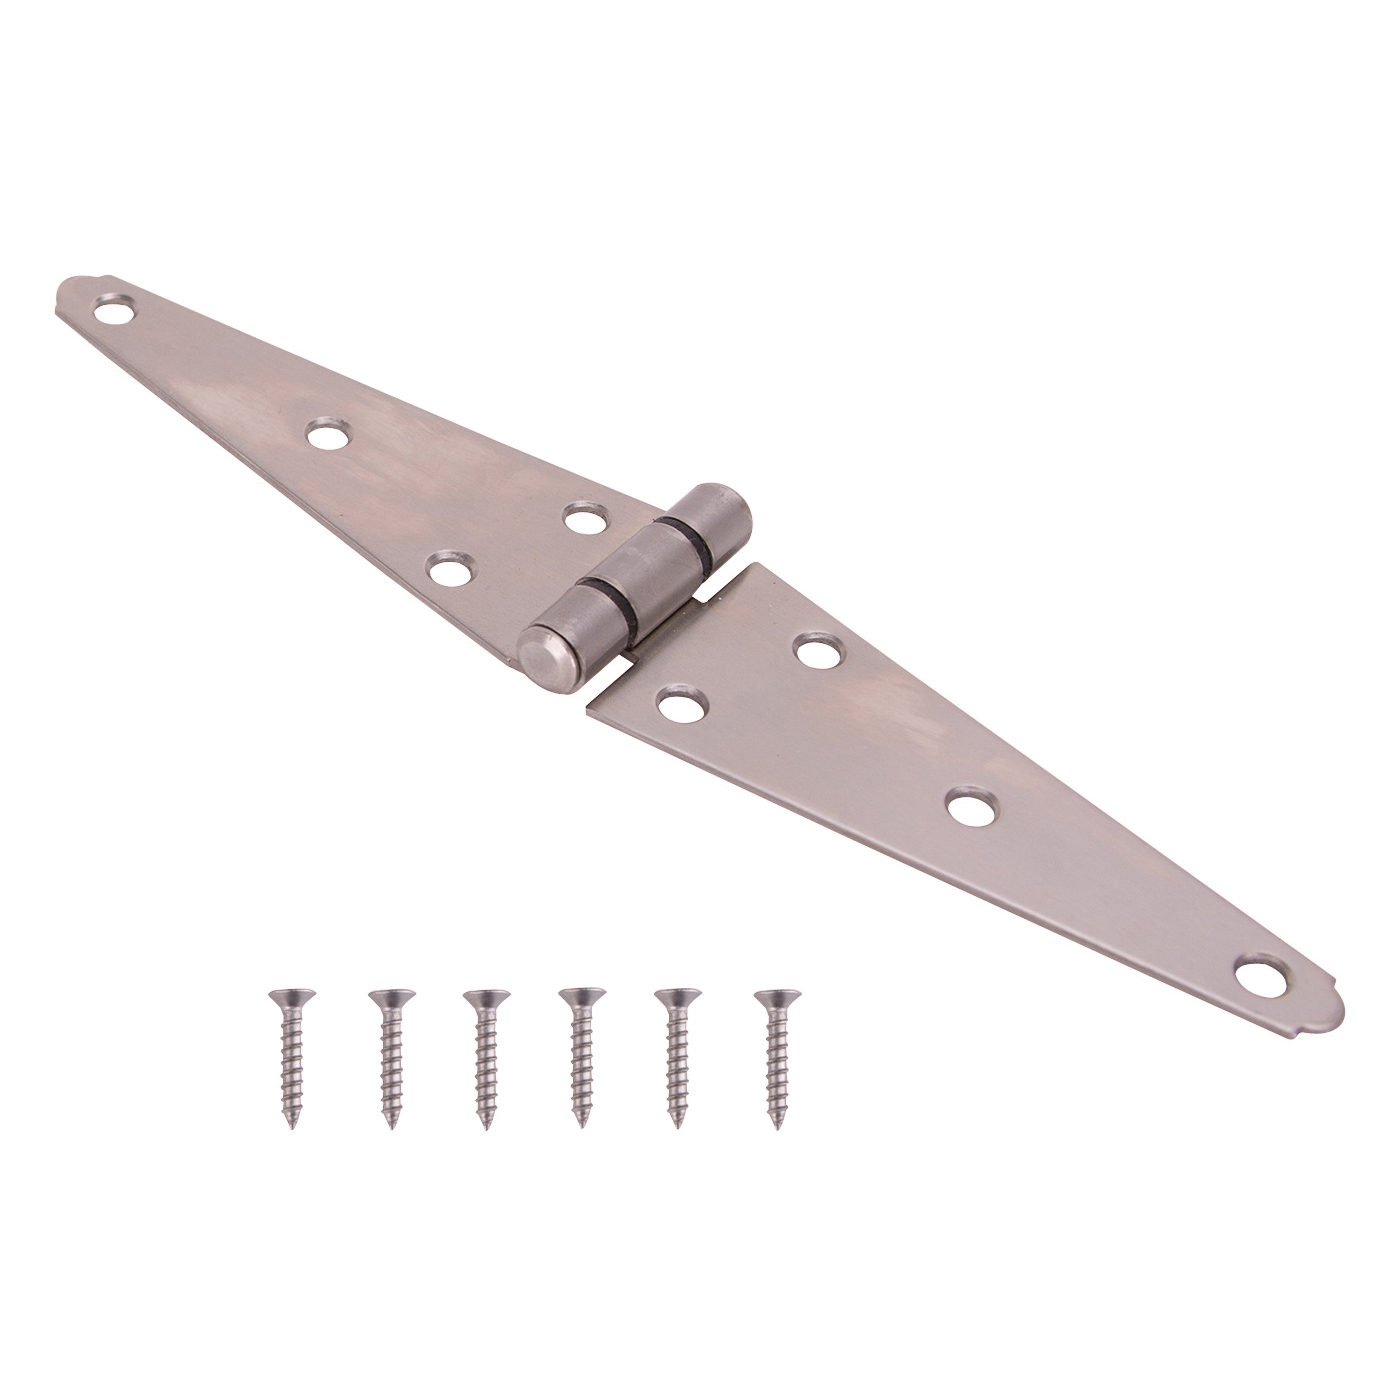 HSH-S06-C1PS Strap Hinge, 2 mm Thick Leaf, Brushed Stainless Steel, 180 Range of Motion